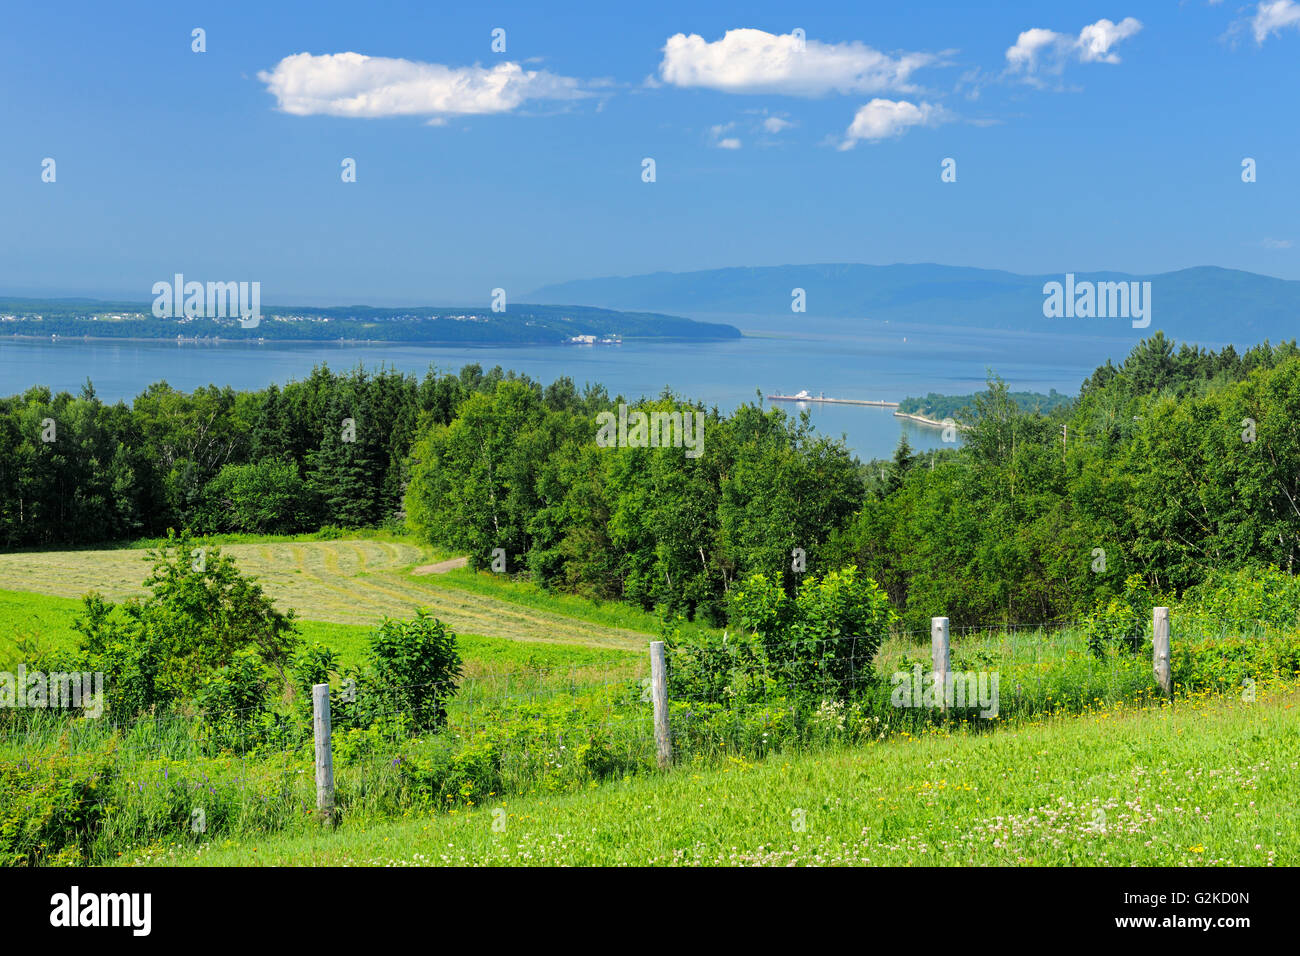 View of the St. Lawrence River from St-Joseph-de-la-Rive L'Isle-aux-Coudres Quebec Canada Stock Photo